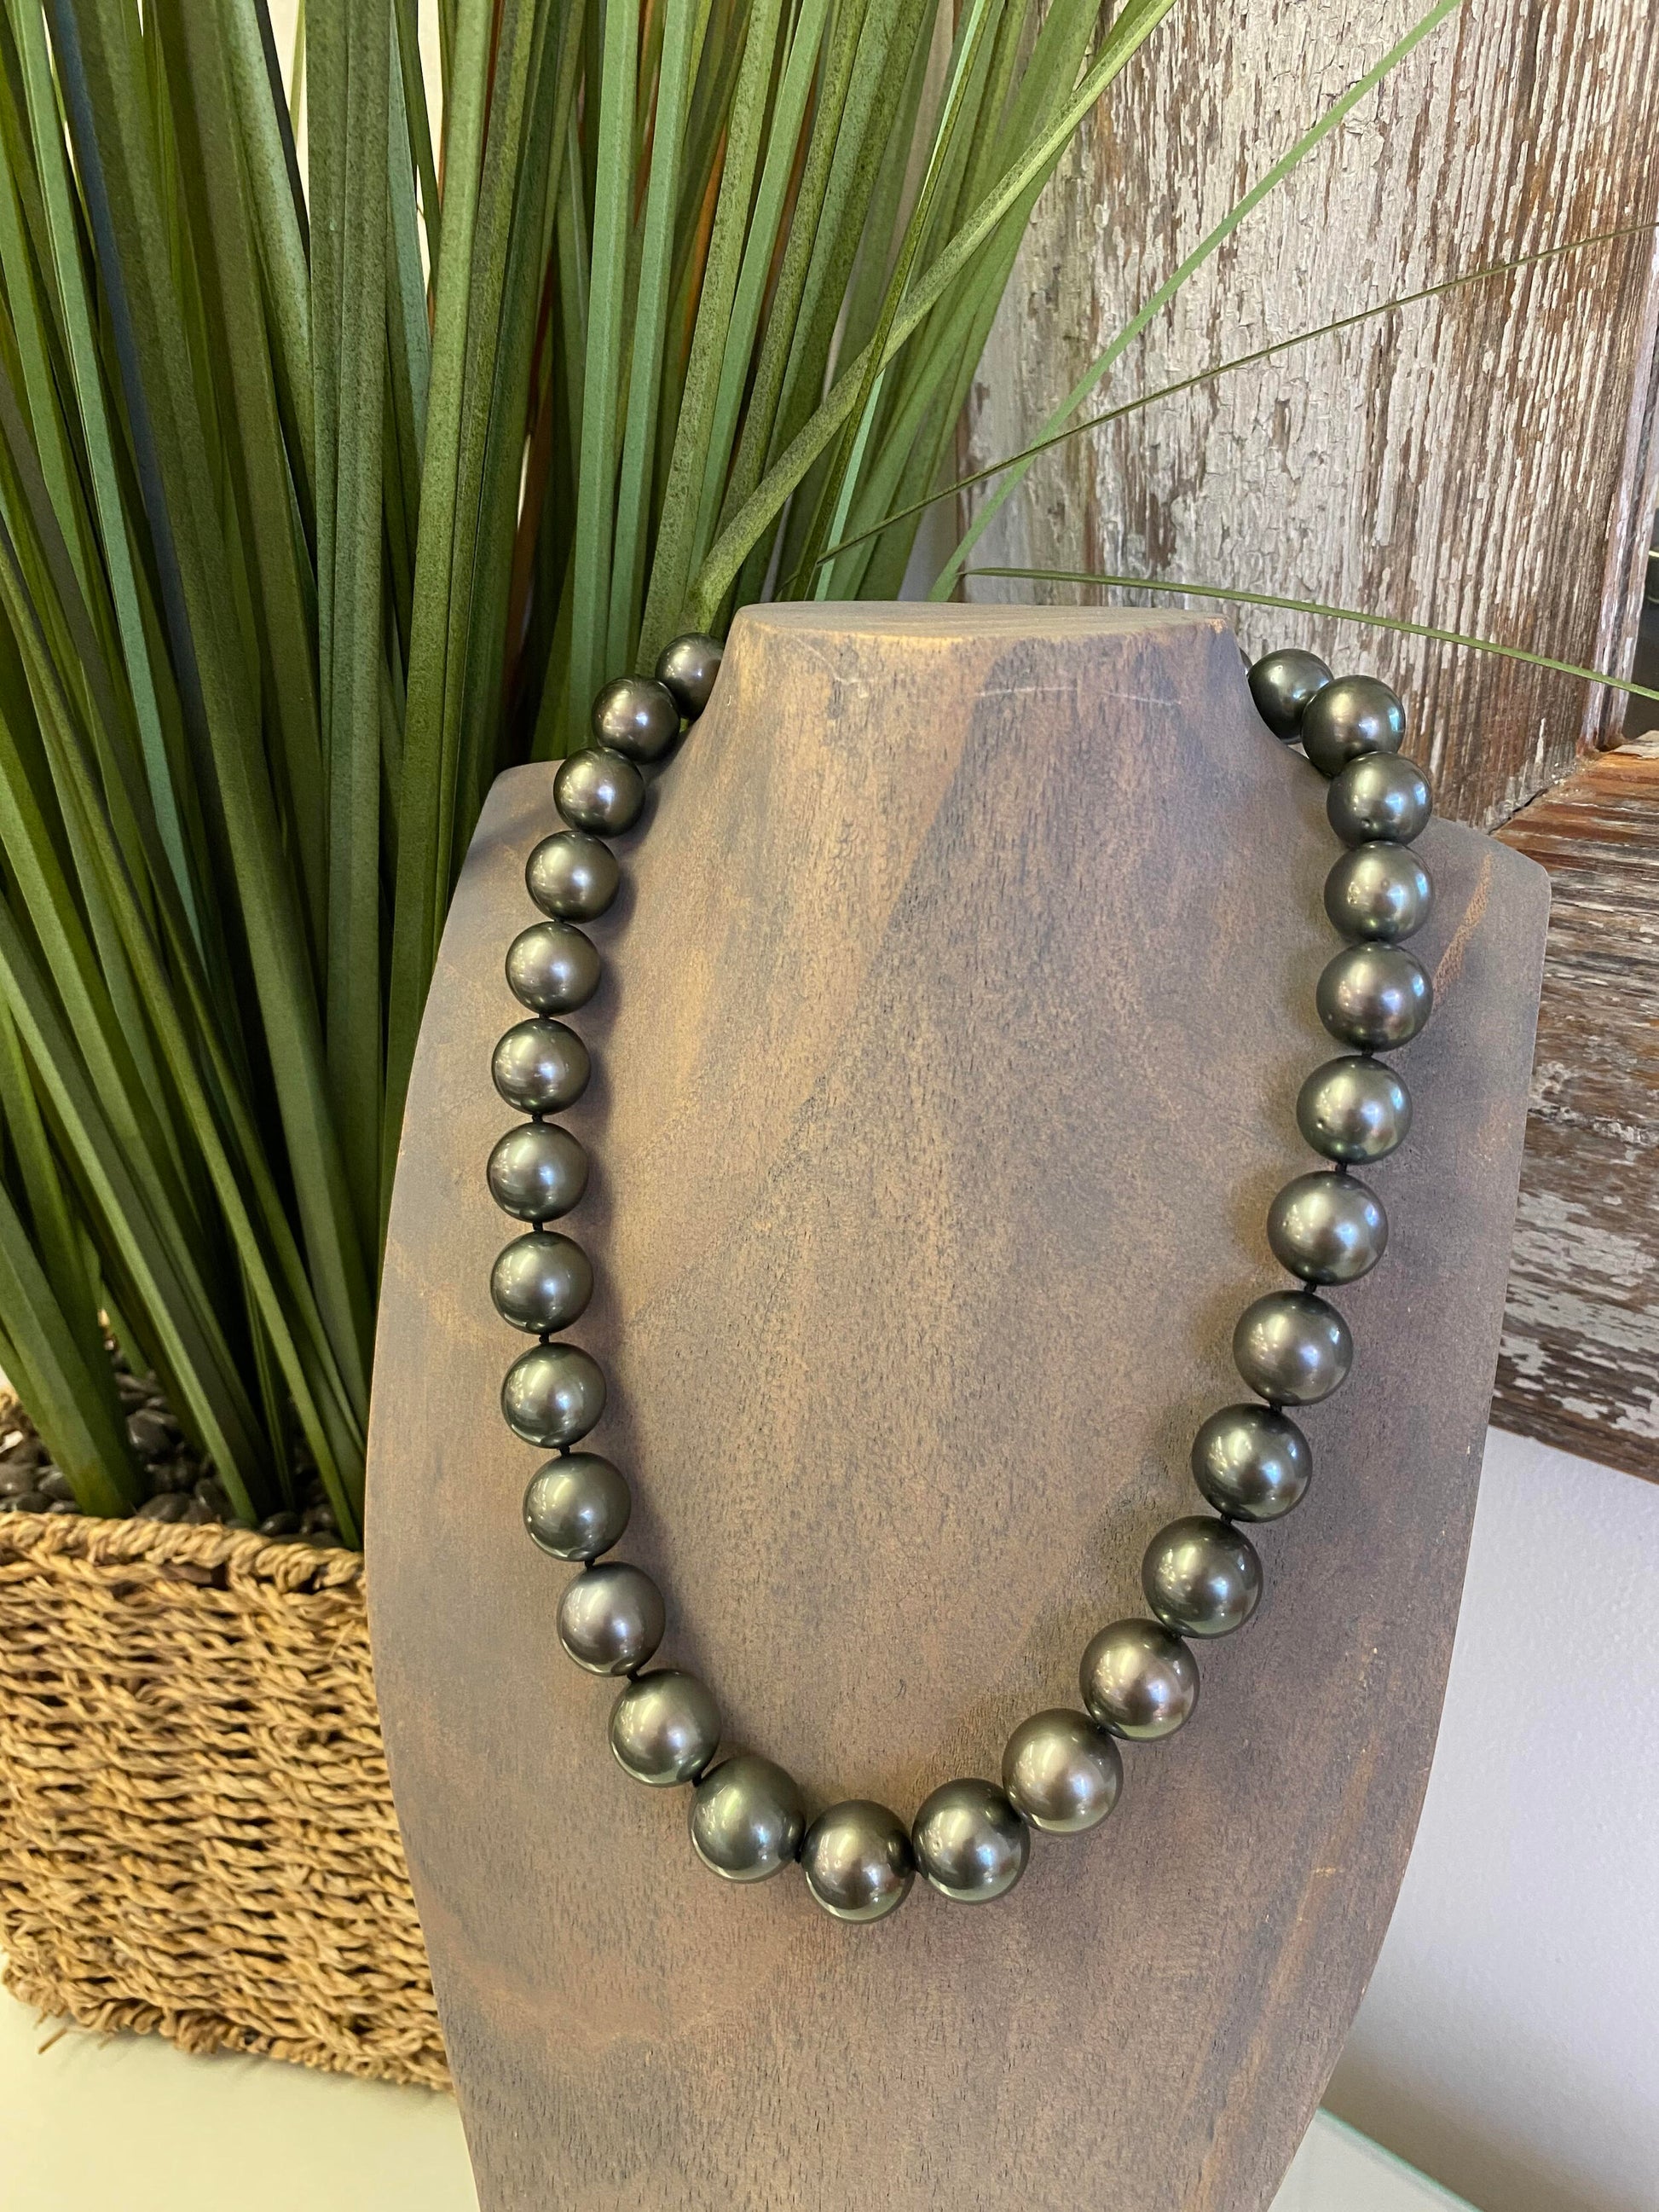 Beautiful Black Tahitian Pearl Necklace with 14K White Gold Clasp handmade by Jewel in the Sea Nantucket